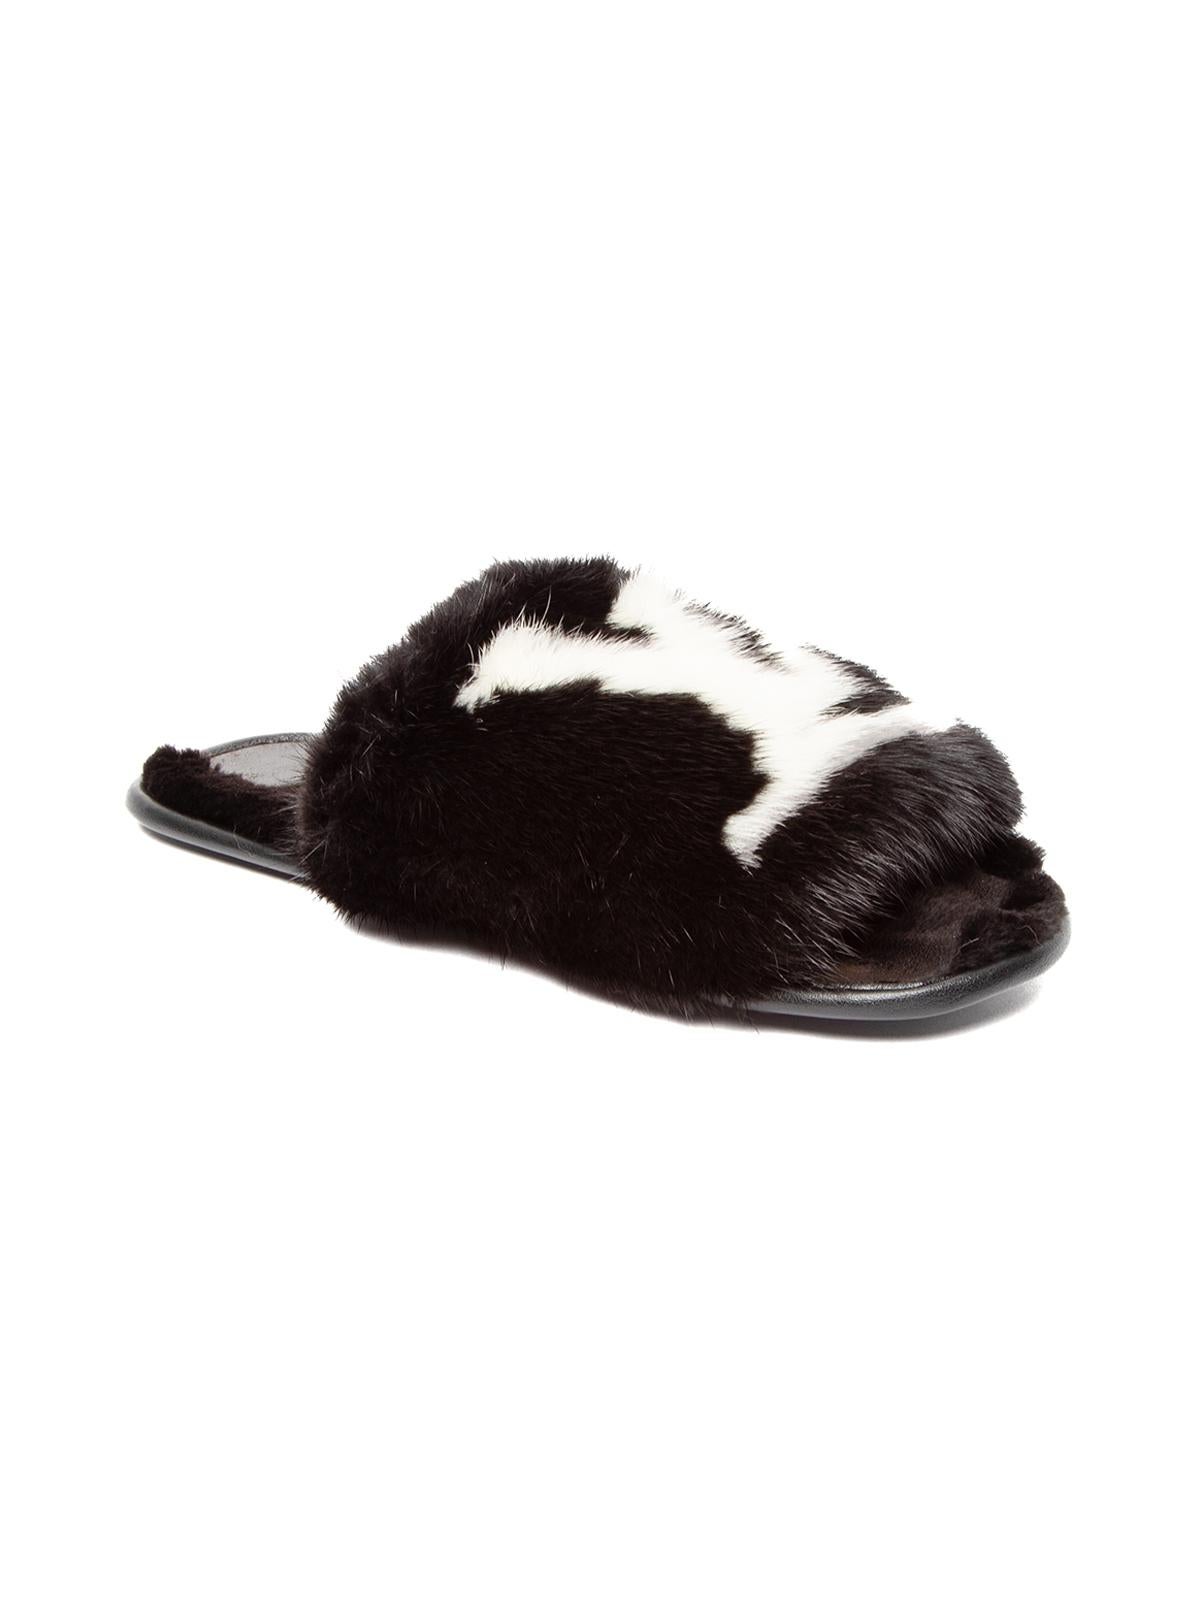 Louis Vuitton Slippers Fur - For Sale on 1stDibs  lv furry slippers, lv  fur slippers, fluffy lv slippers